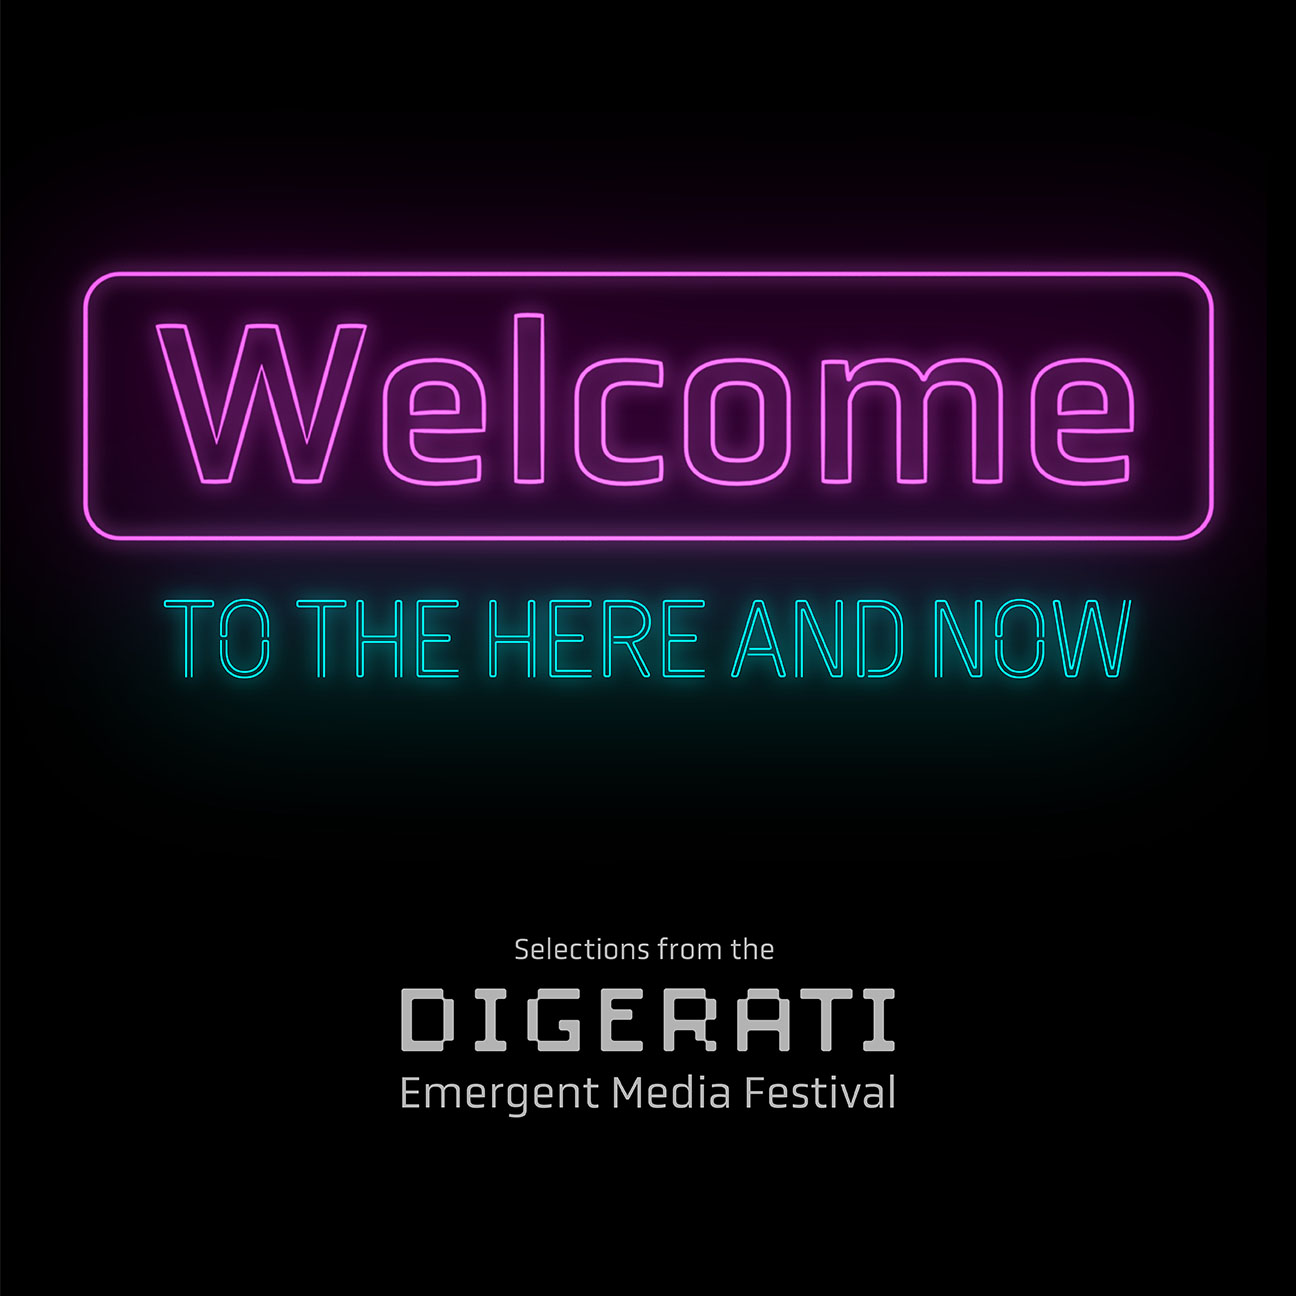 text on black background “Welcome to the Here and Now: Selections from the Digerati Emergent Media Festival